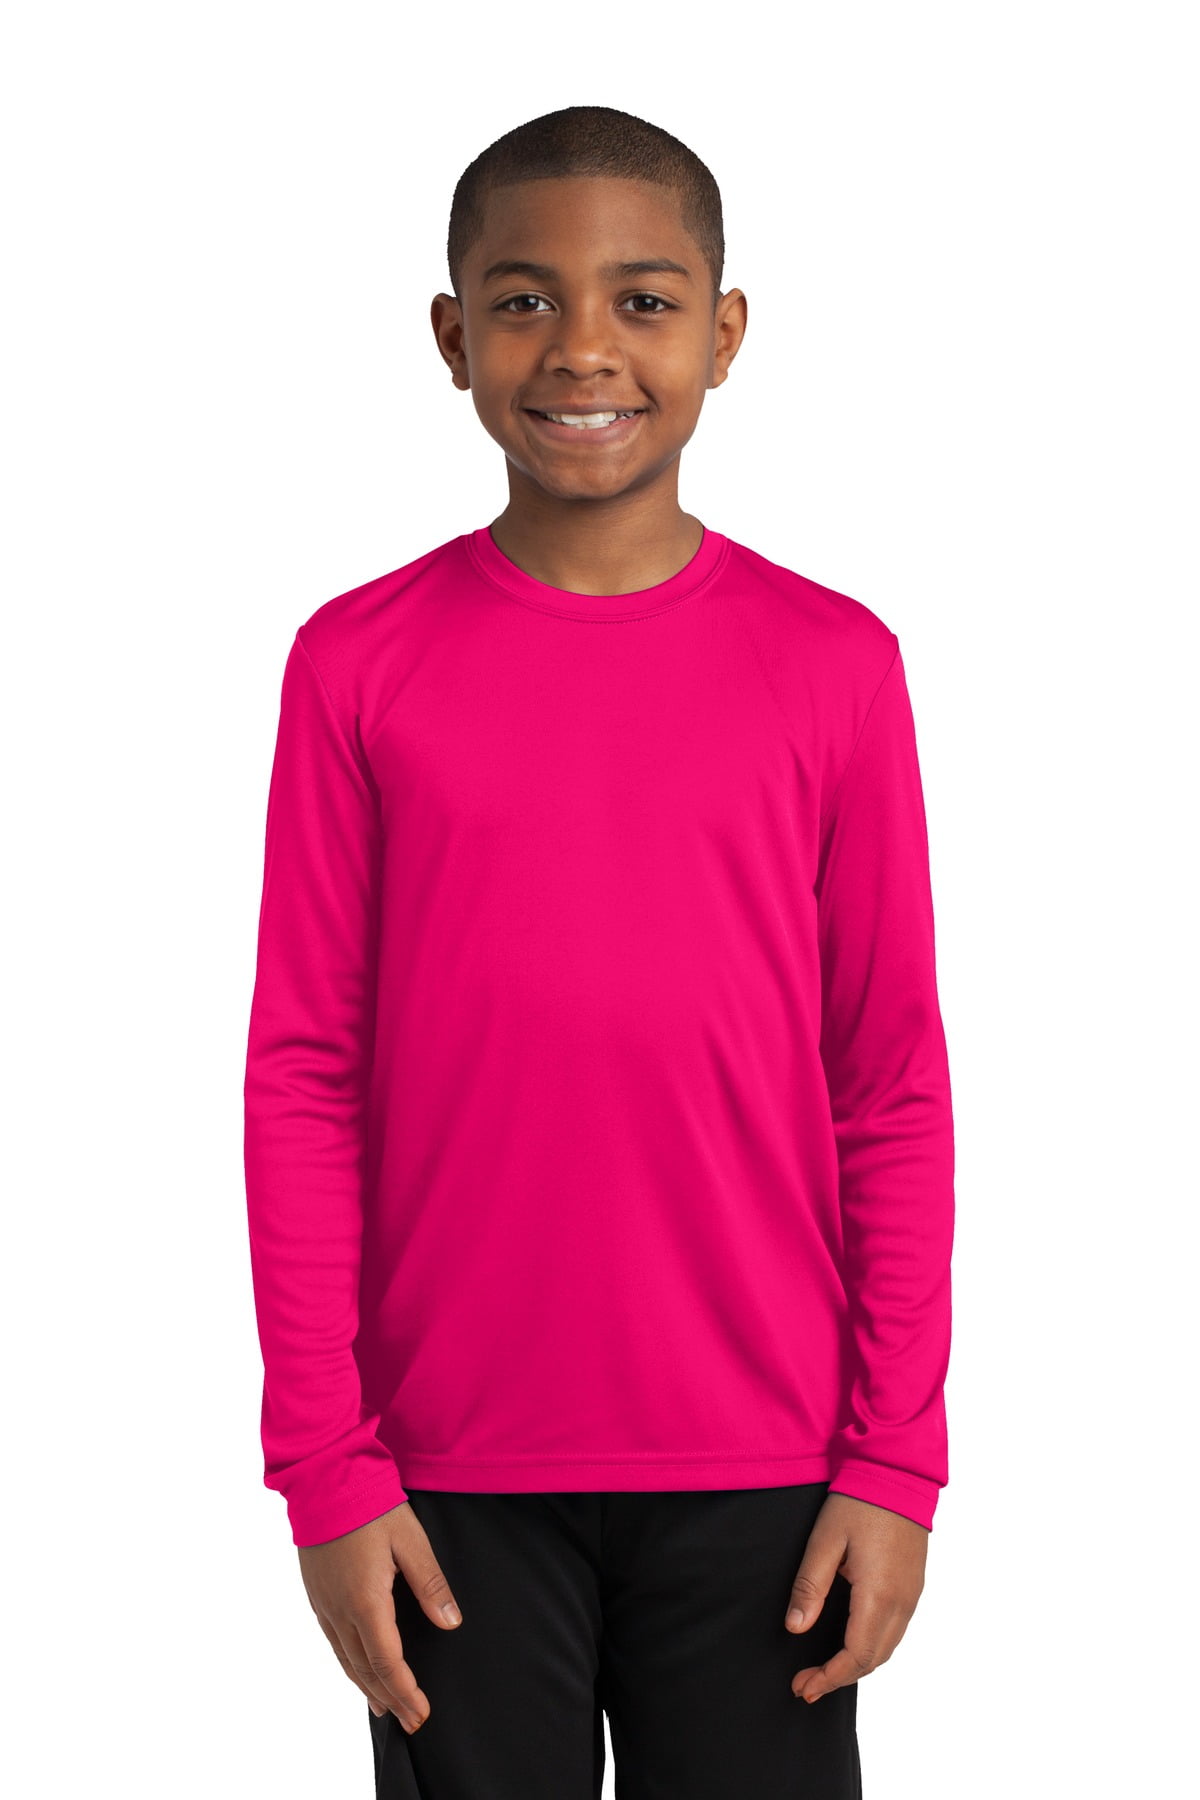 Spyder Lively Tech TEE Shirt Youth Girl's Pink Long Sleeve Base Layer Shirt NEW 